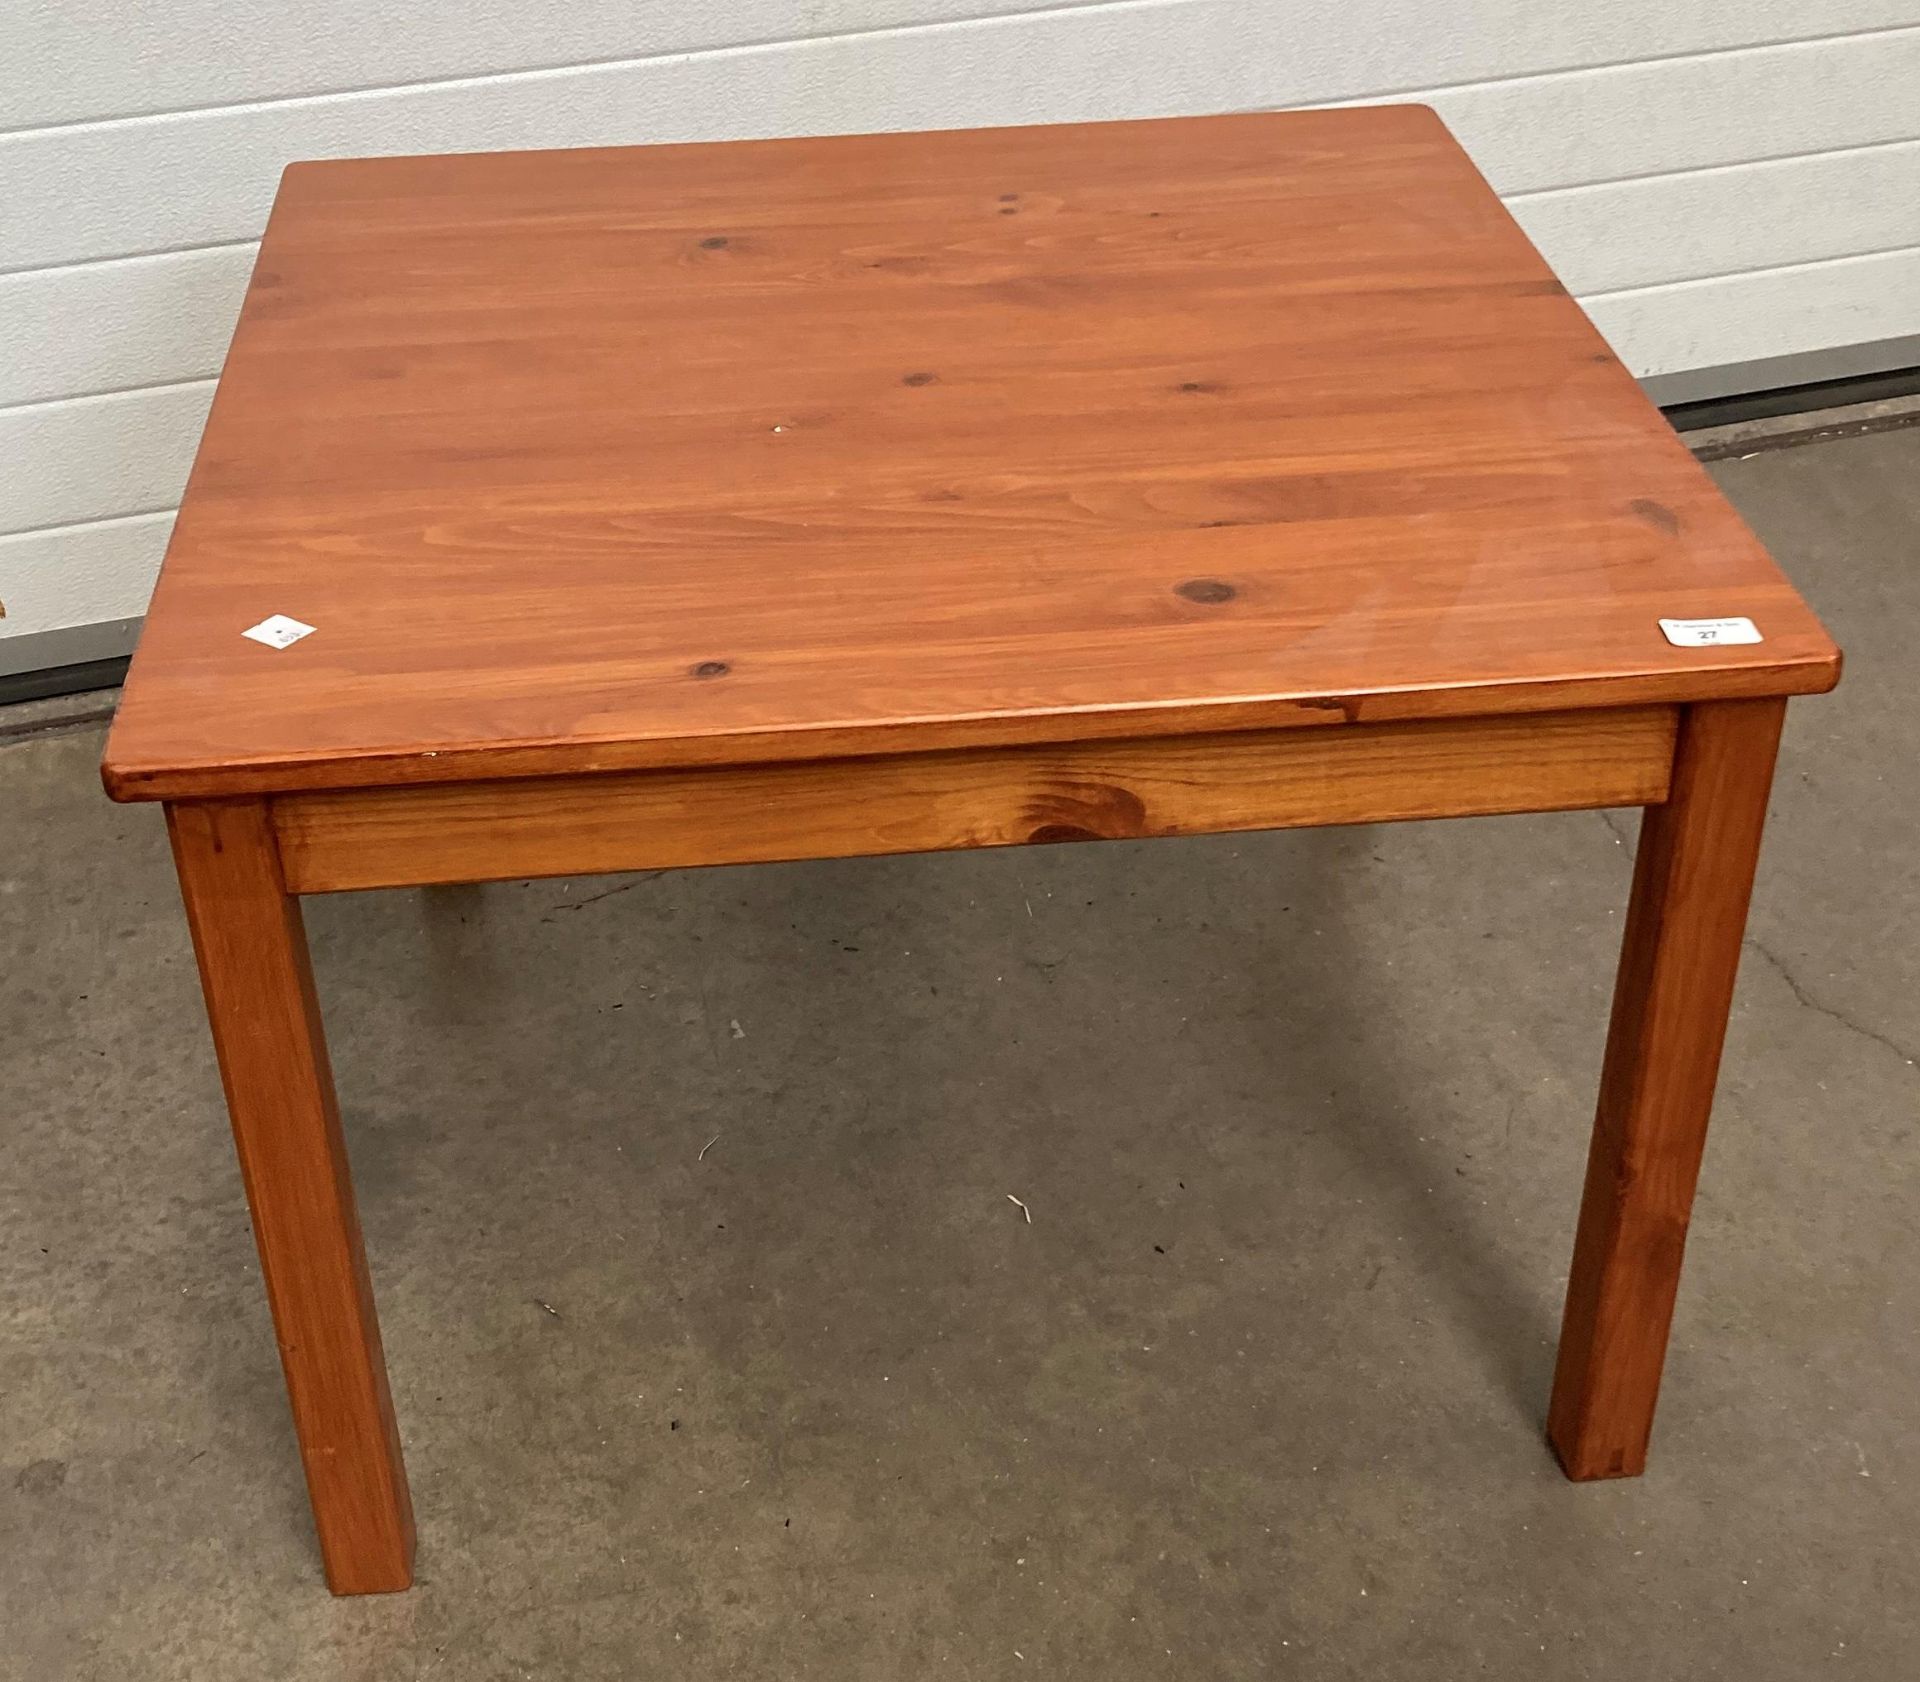 A stained pine square coffee table 70cm x 70cm x 50cm high